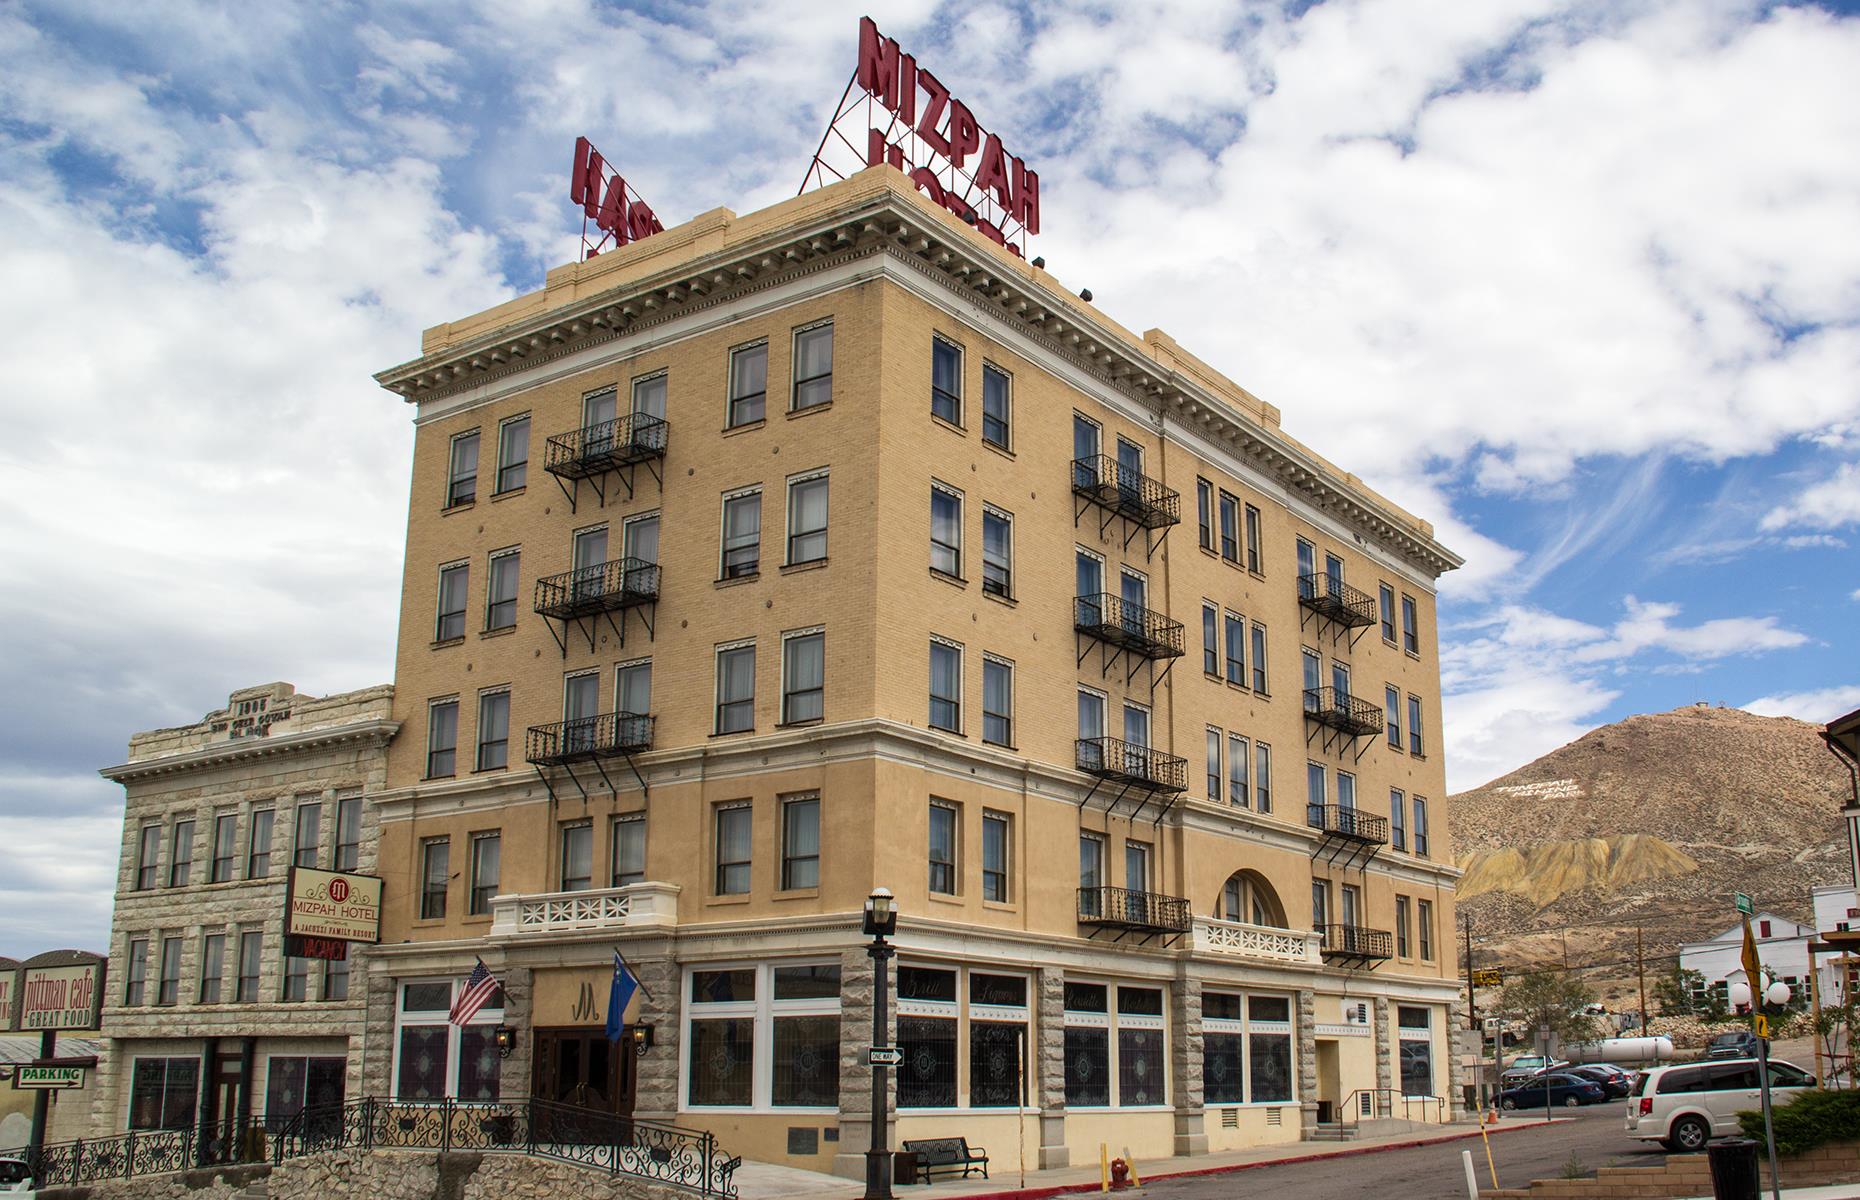 <p><a href="https://www.booking.com/hotel/us/mizpah-tonopah.en-gb.html?aid=1280739" rel="nofollow” target=">The Mizpah Hotel</a> certainly has a reputation for its paranormal goings-on both within the state and beyond. A psychic visited the hotel once and said she communicated with several spirits, while TV's <em>Ghost Hunters</em> team managed to capture a decommissioned elevator randomly opening and closing its doors on camera. Mizpah's current owners don't shy away from the hotel's bizarre fame and say that guests are welcome to interact with the friendly ghosts. </p>